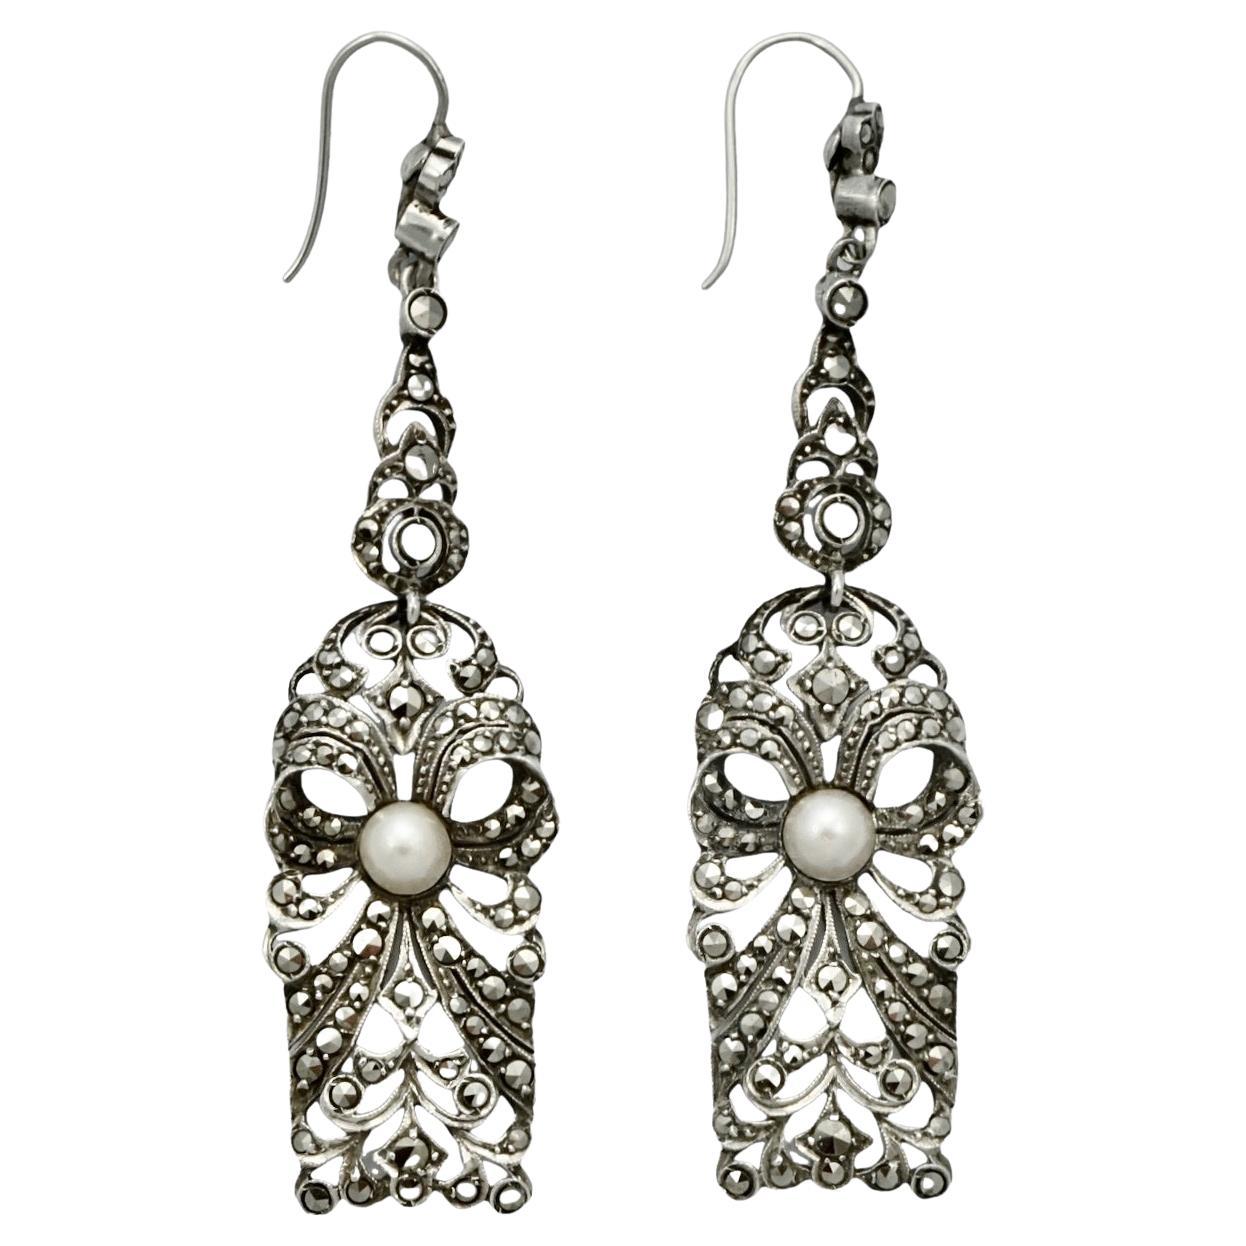 Art Deco Silver and Marcasite Earrings set with Mabe Cultured Pearls circa 1920s